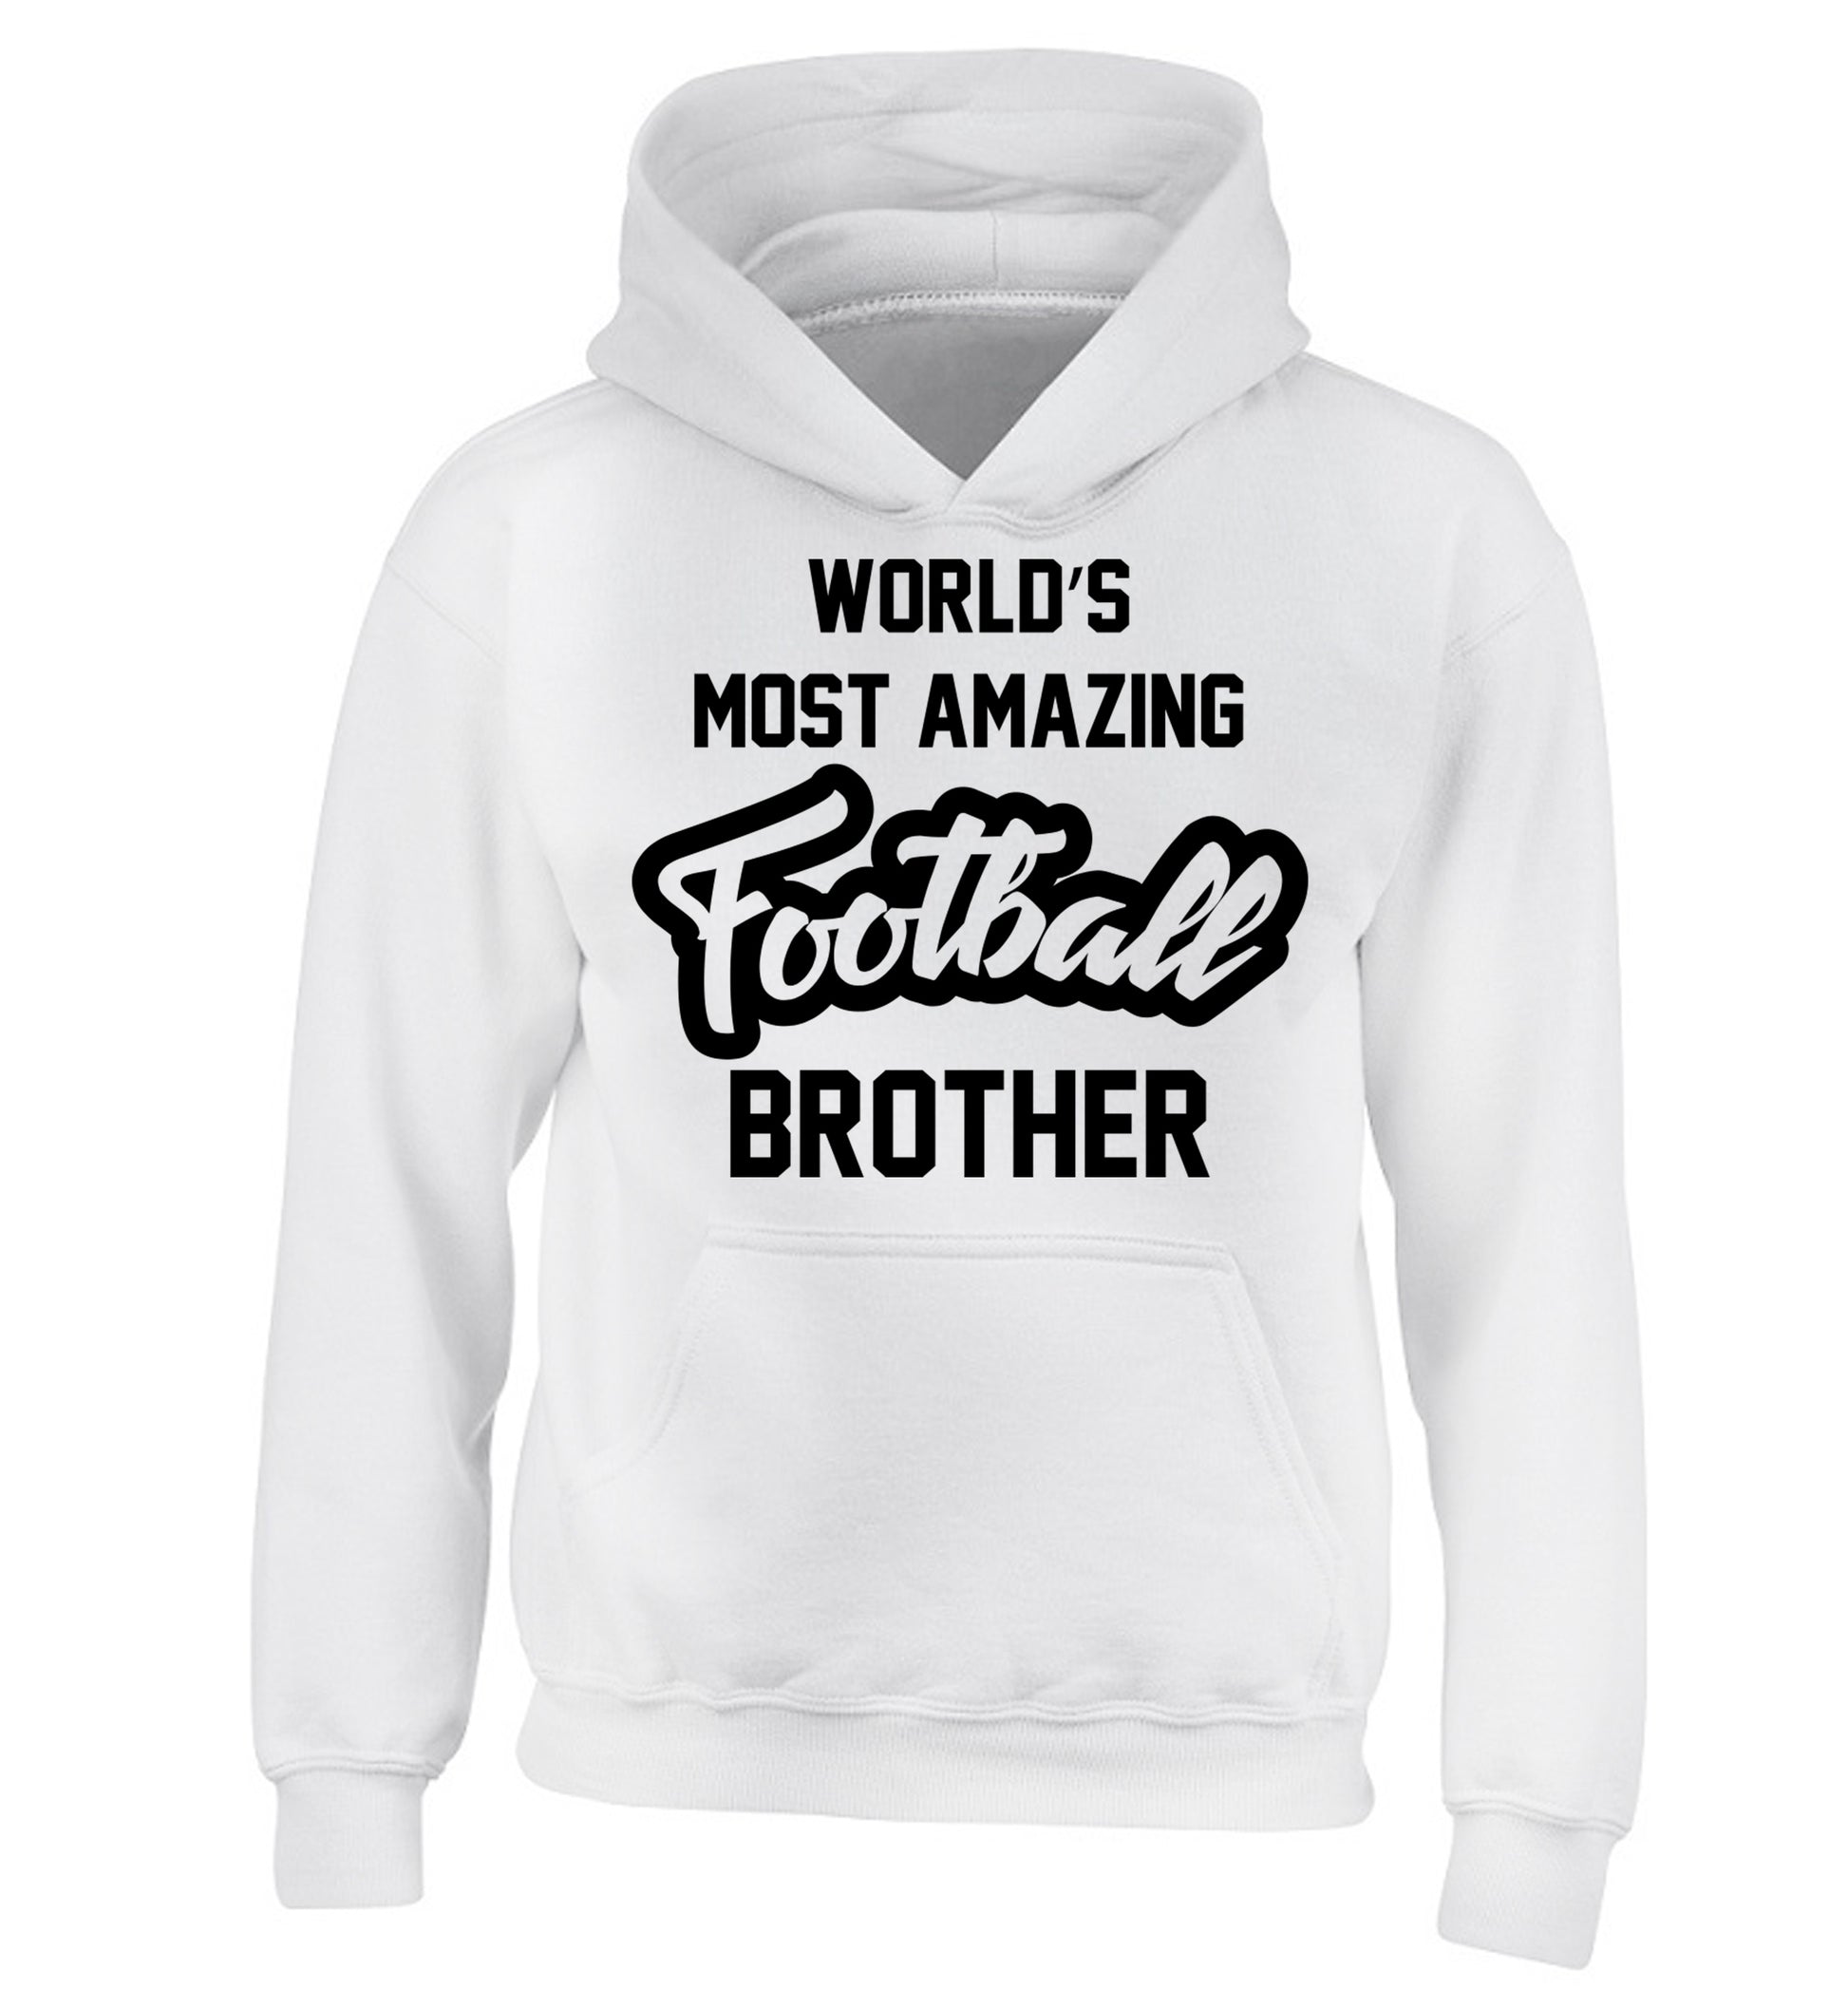 Worlds most amazing football brother children's white hoodie 12-14 Years